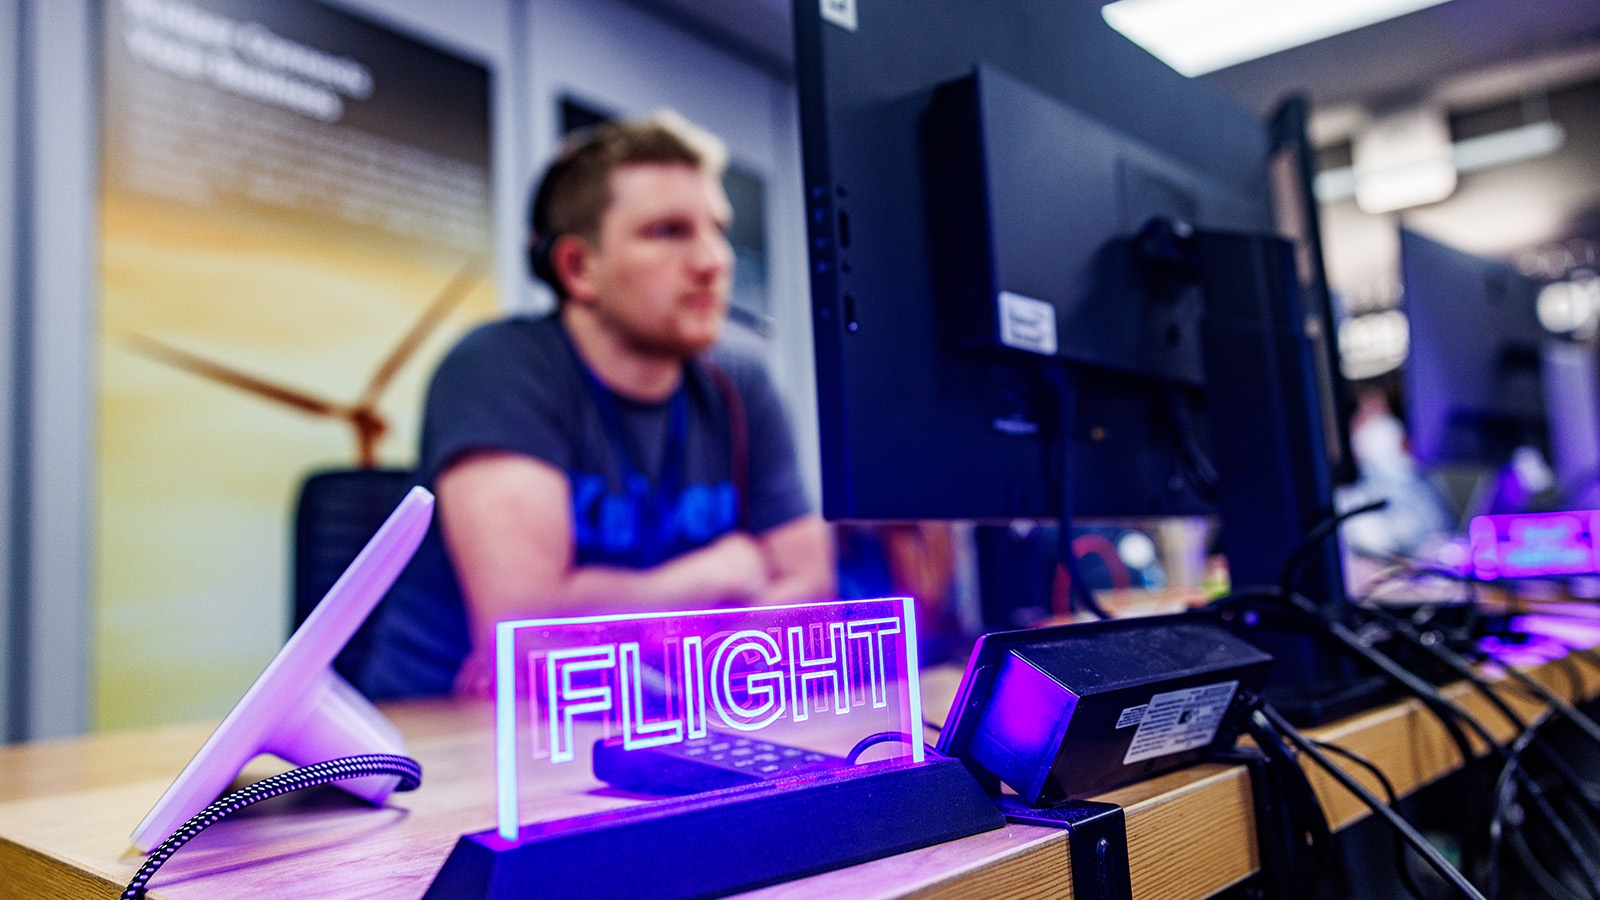 An image of a person from Project Kuiper’s mission management team working on a computer. There is a neon sign sitting on the desk that reads "FLIGHT"